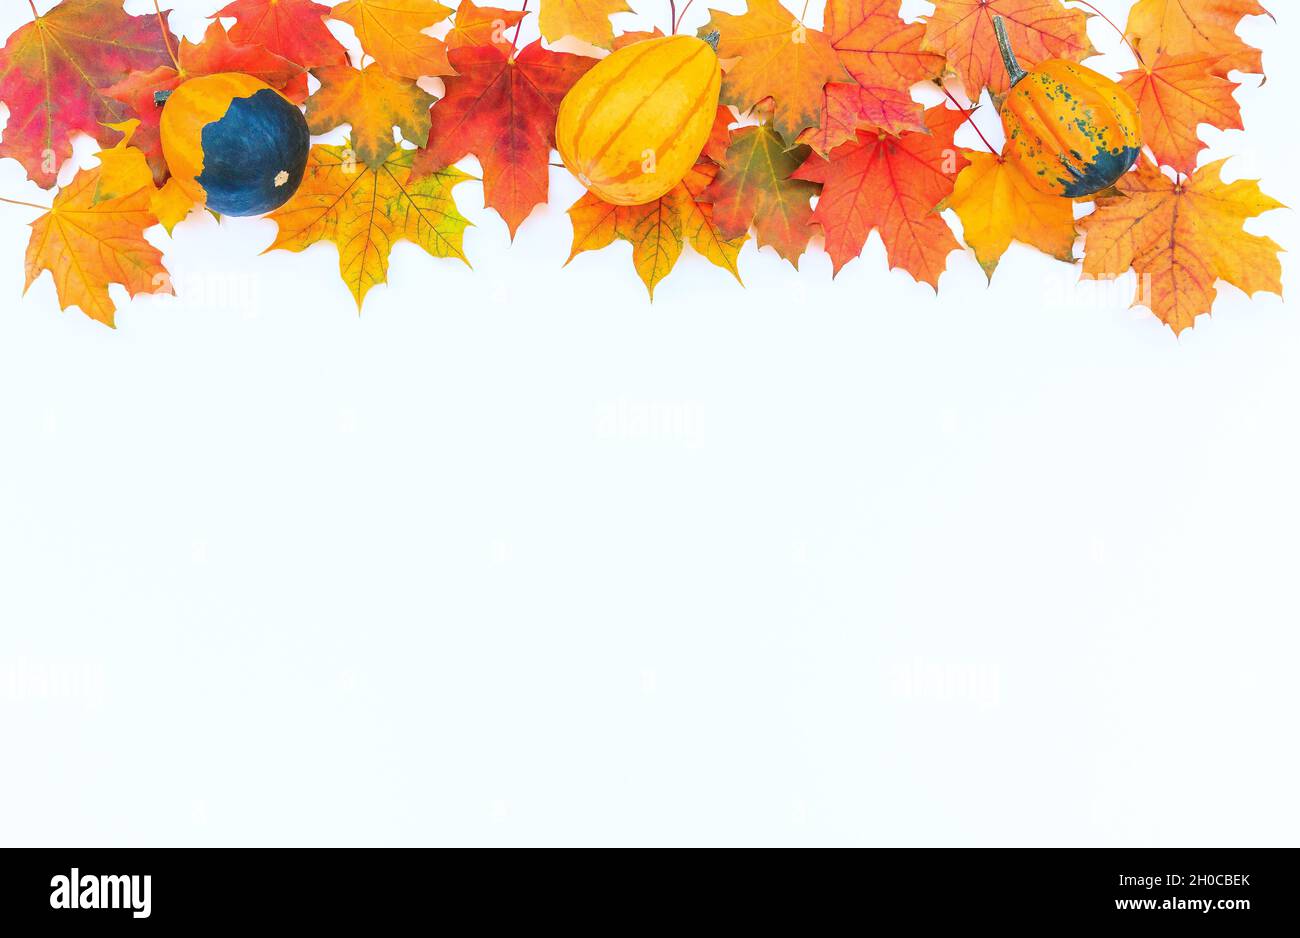 Autumn decor from pumpkins and leaves on a white background. Flat lay autumn composition with copy space. Stock Photo